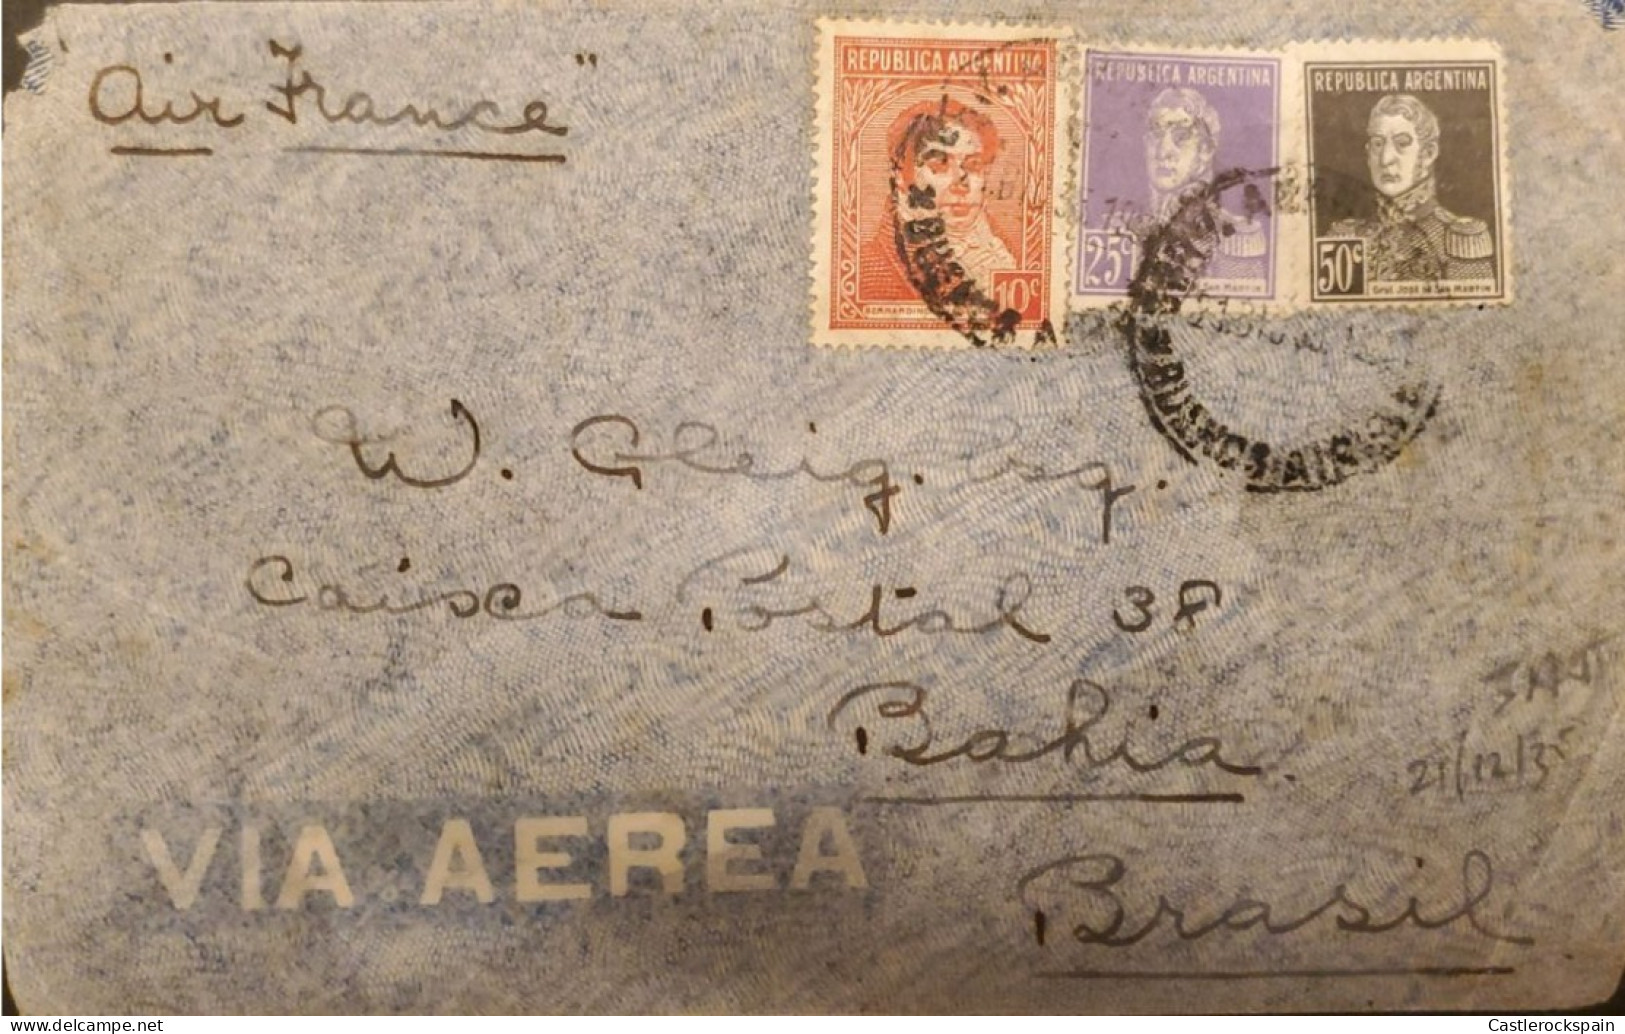 MI) 1935, ARGENTINA, AIR FRANCE, FROM BUENOS AIRES TO BAHIA - BRAZIL, AIR MAIL, GRAL SAN MARTIN AND RIVADAVIA STAMPS - Usados